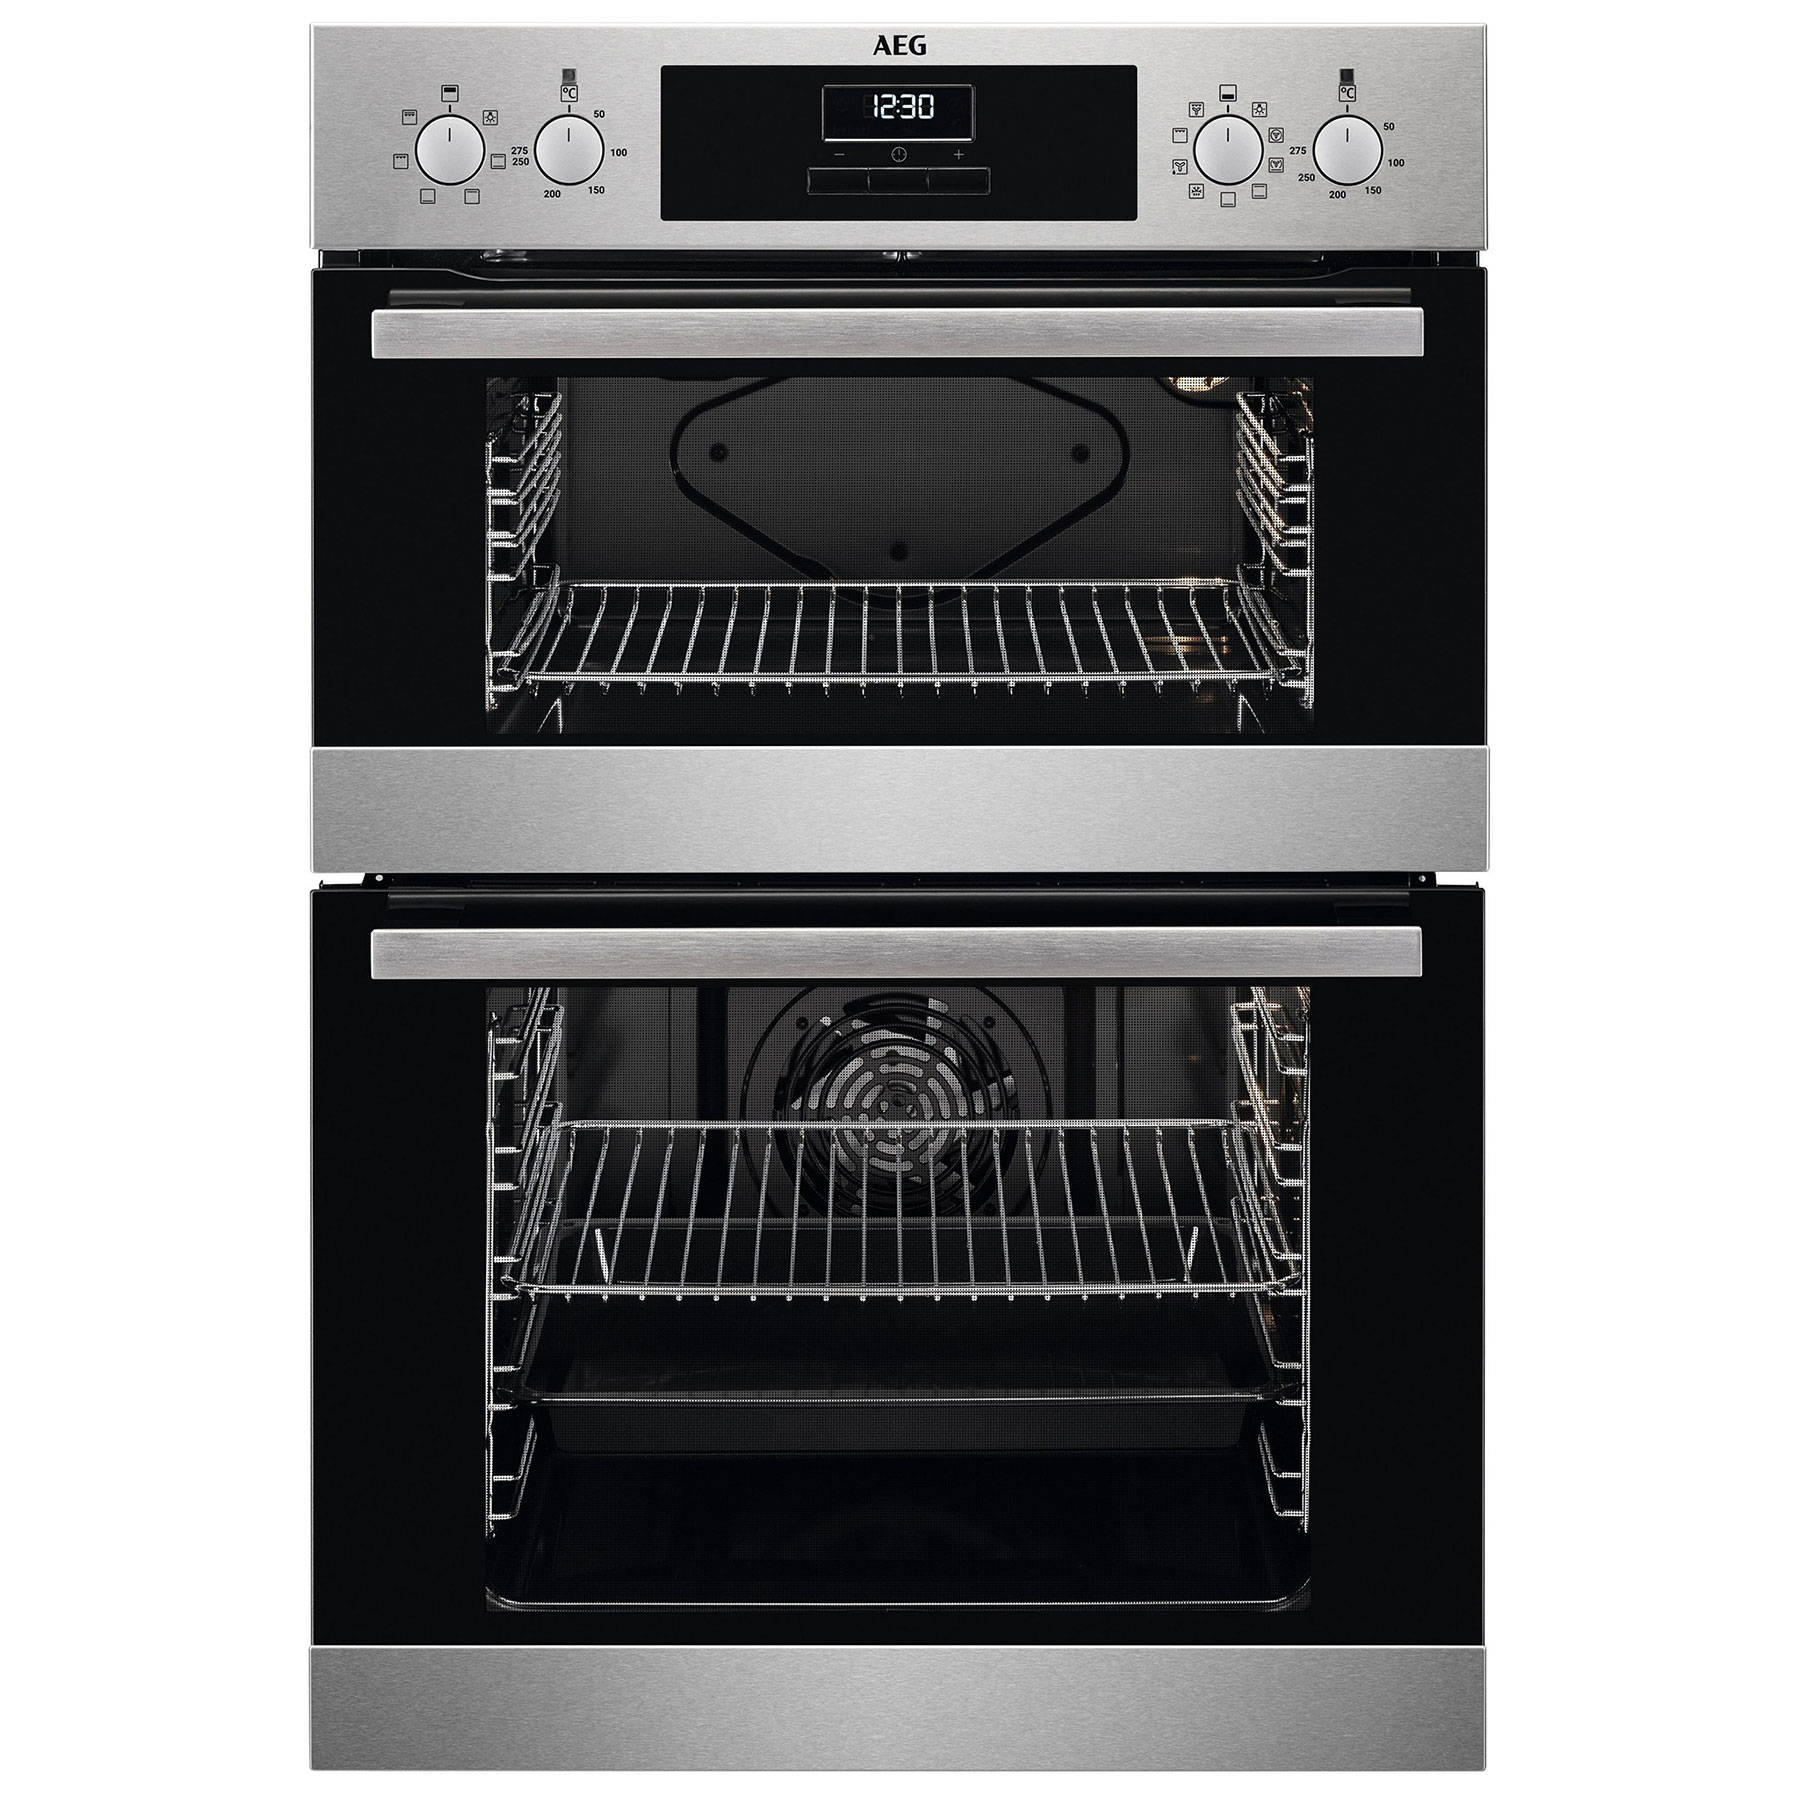 Image of AEG DEX33111EM Built In Double Electric Multifunction Oven in St Steel